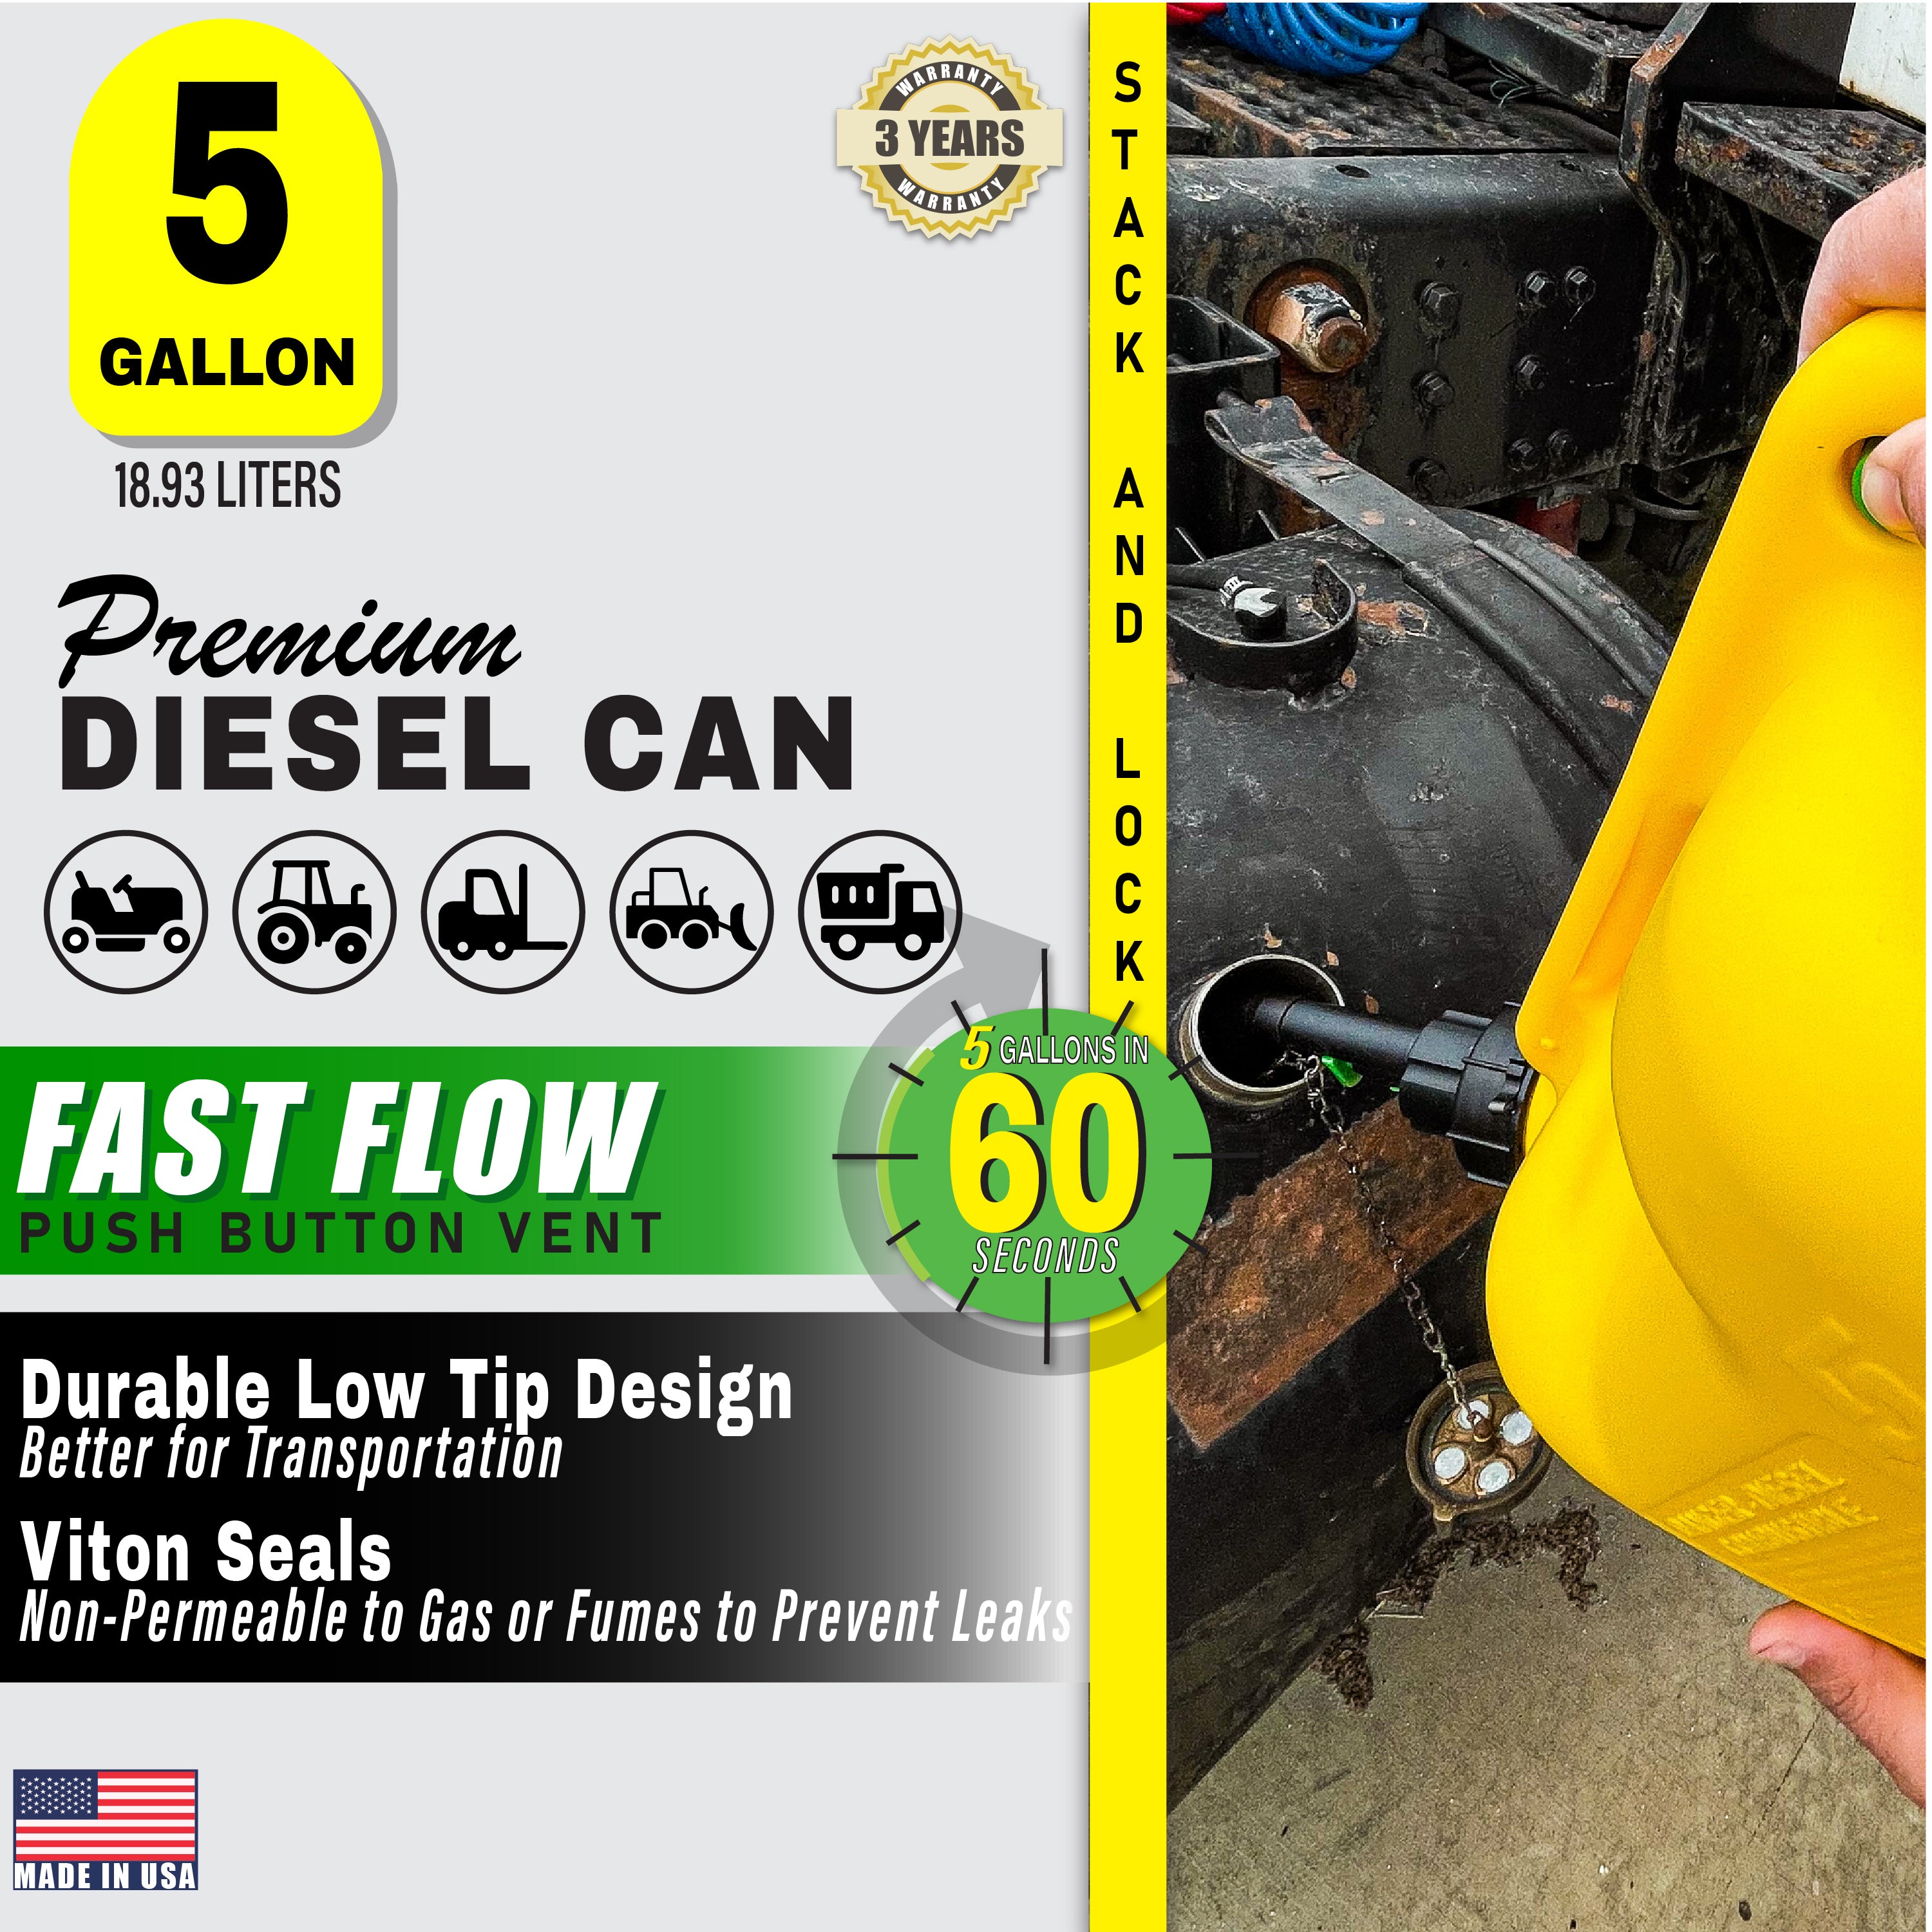 Fuelworx-Yellow-5-Gallon-Stackable-Fast-Pour-Diesel-Fuel-Cans-CARB-Compliant-Made-in-The-USA-5-Gallon-Diesel-Cans-3-Pack-image-4